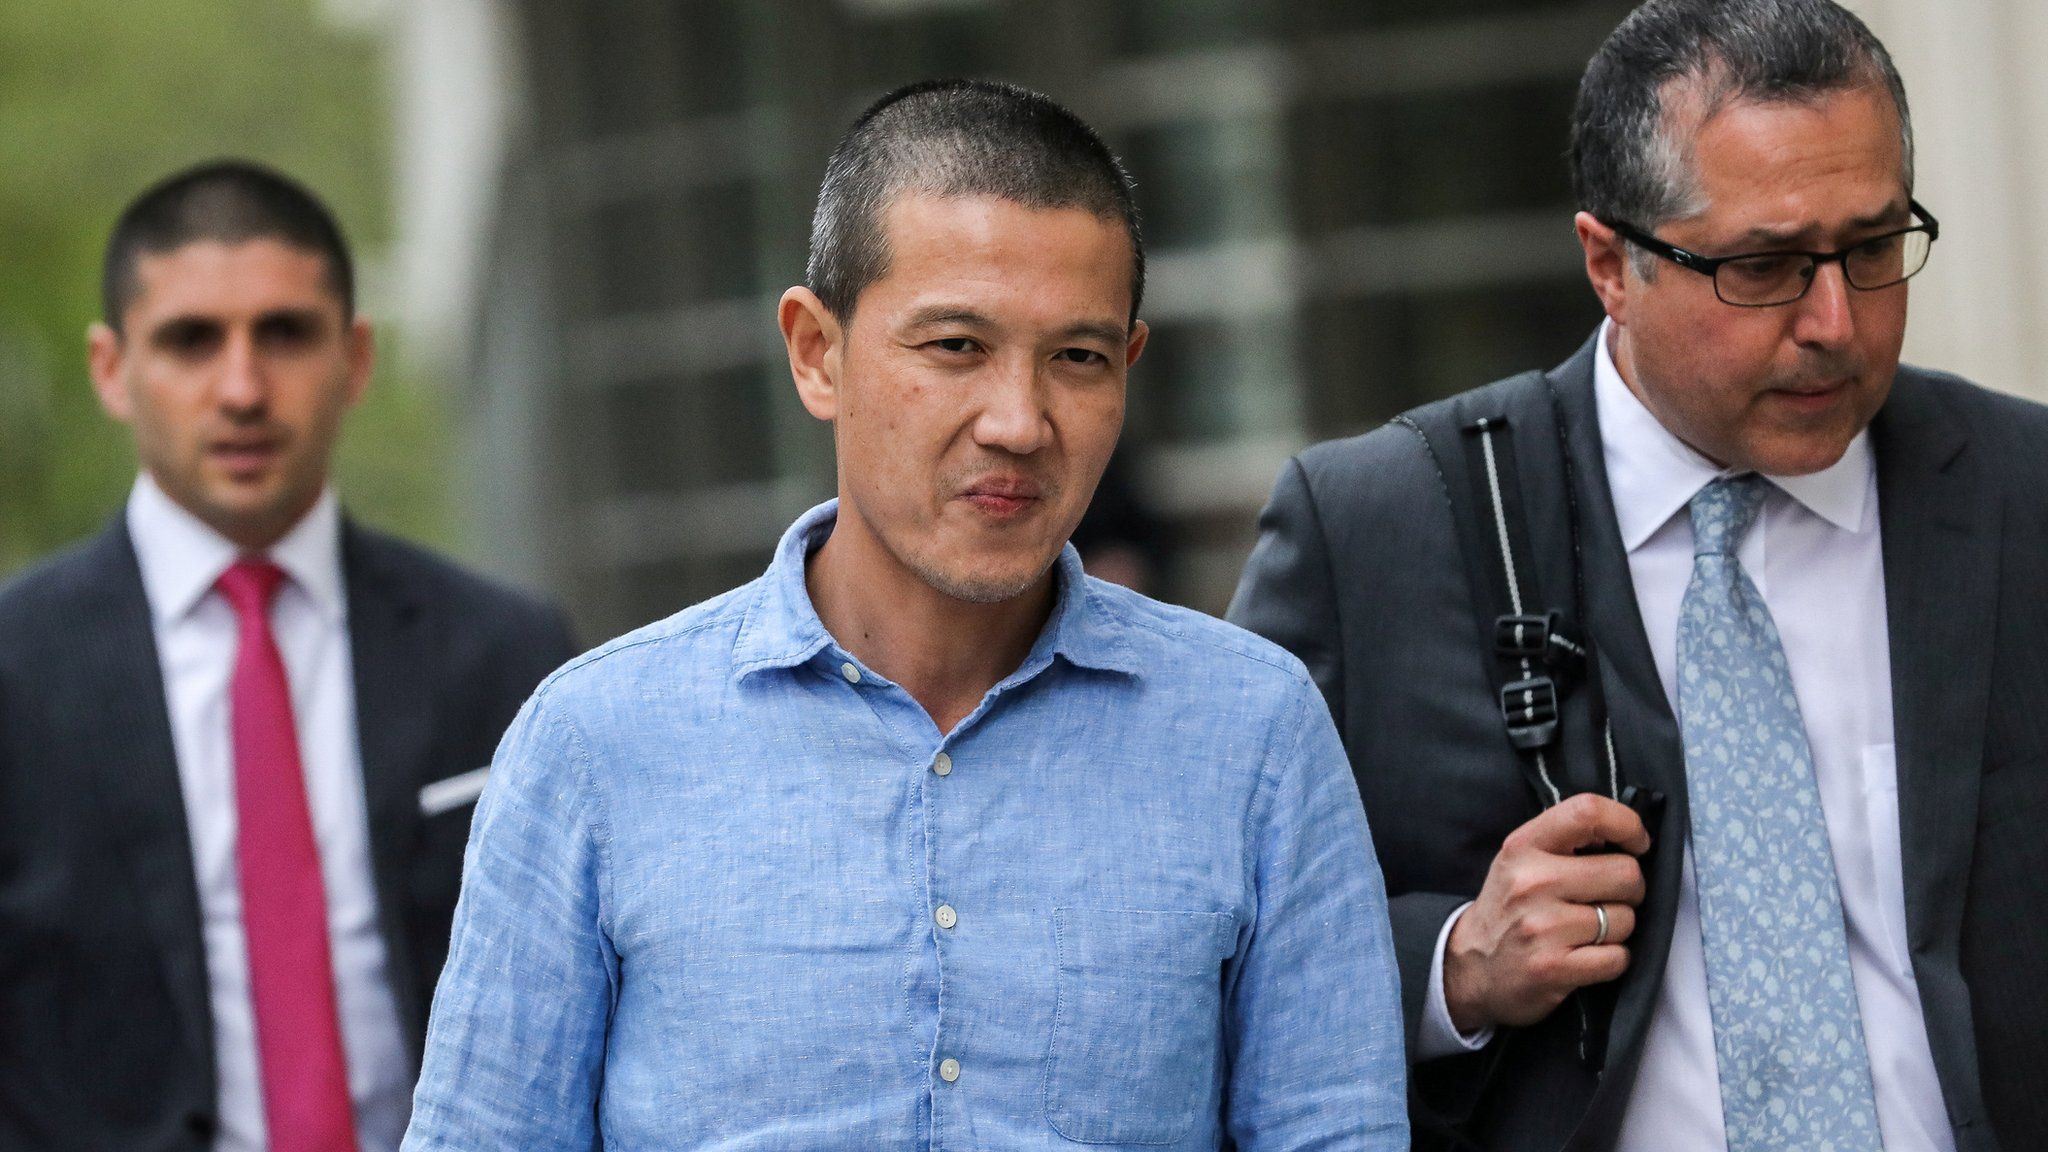 Ex-Goldman Sachs banker Roger Ng and his lawyer Marc Agnifilo leave the federal court in New York, U.S., May 6, 2019.